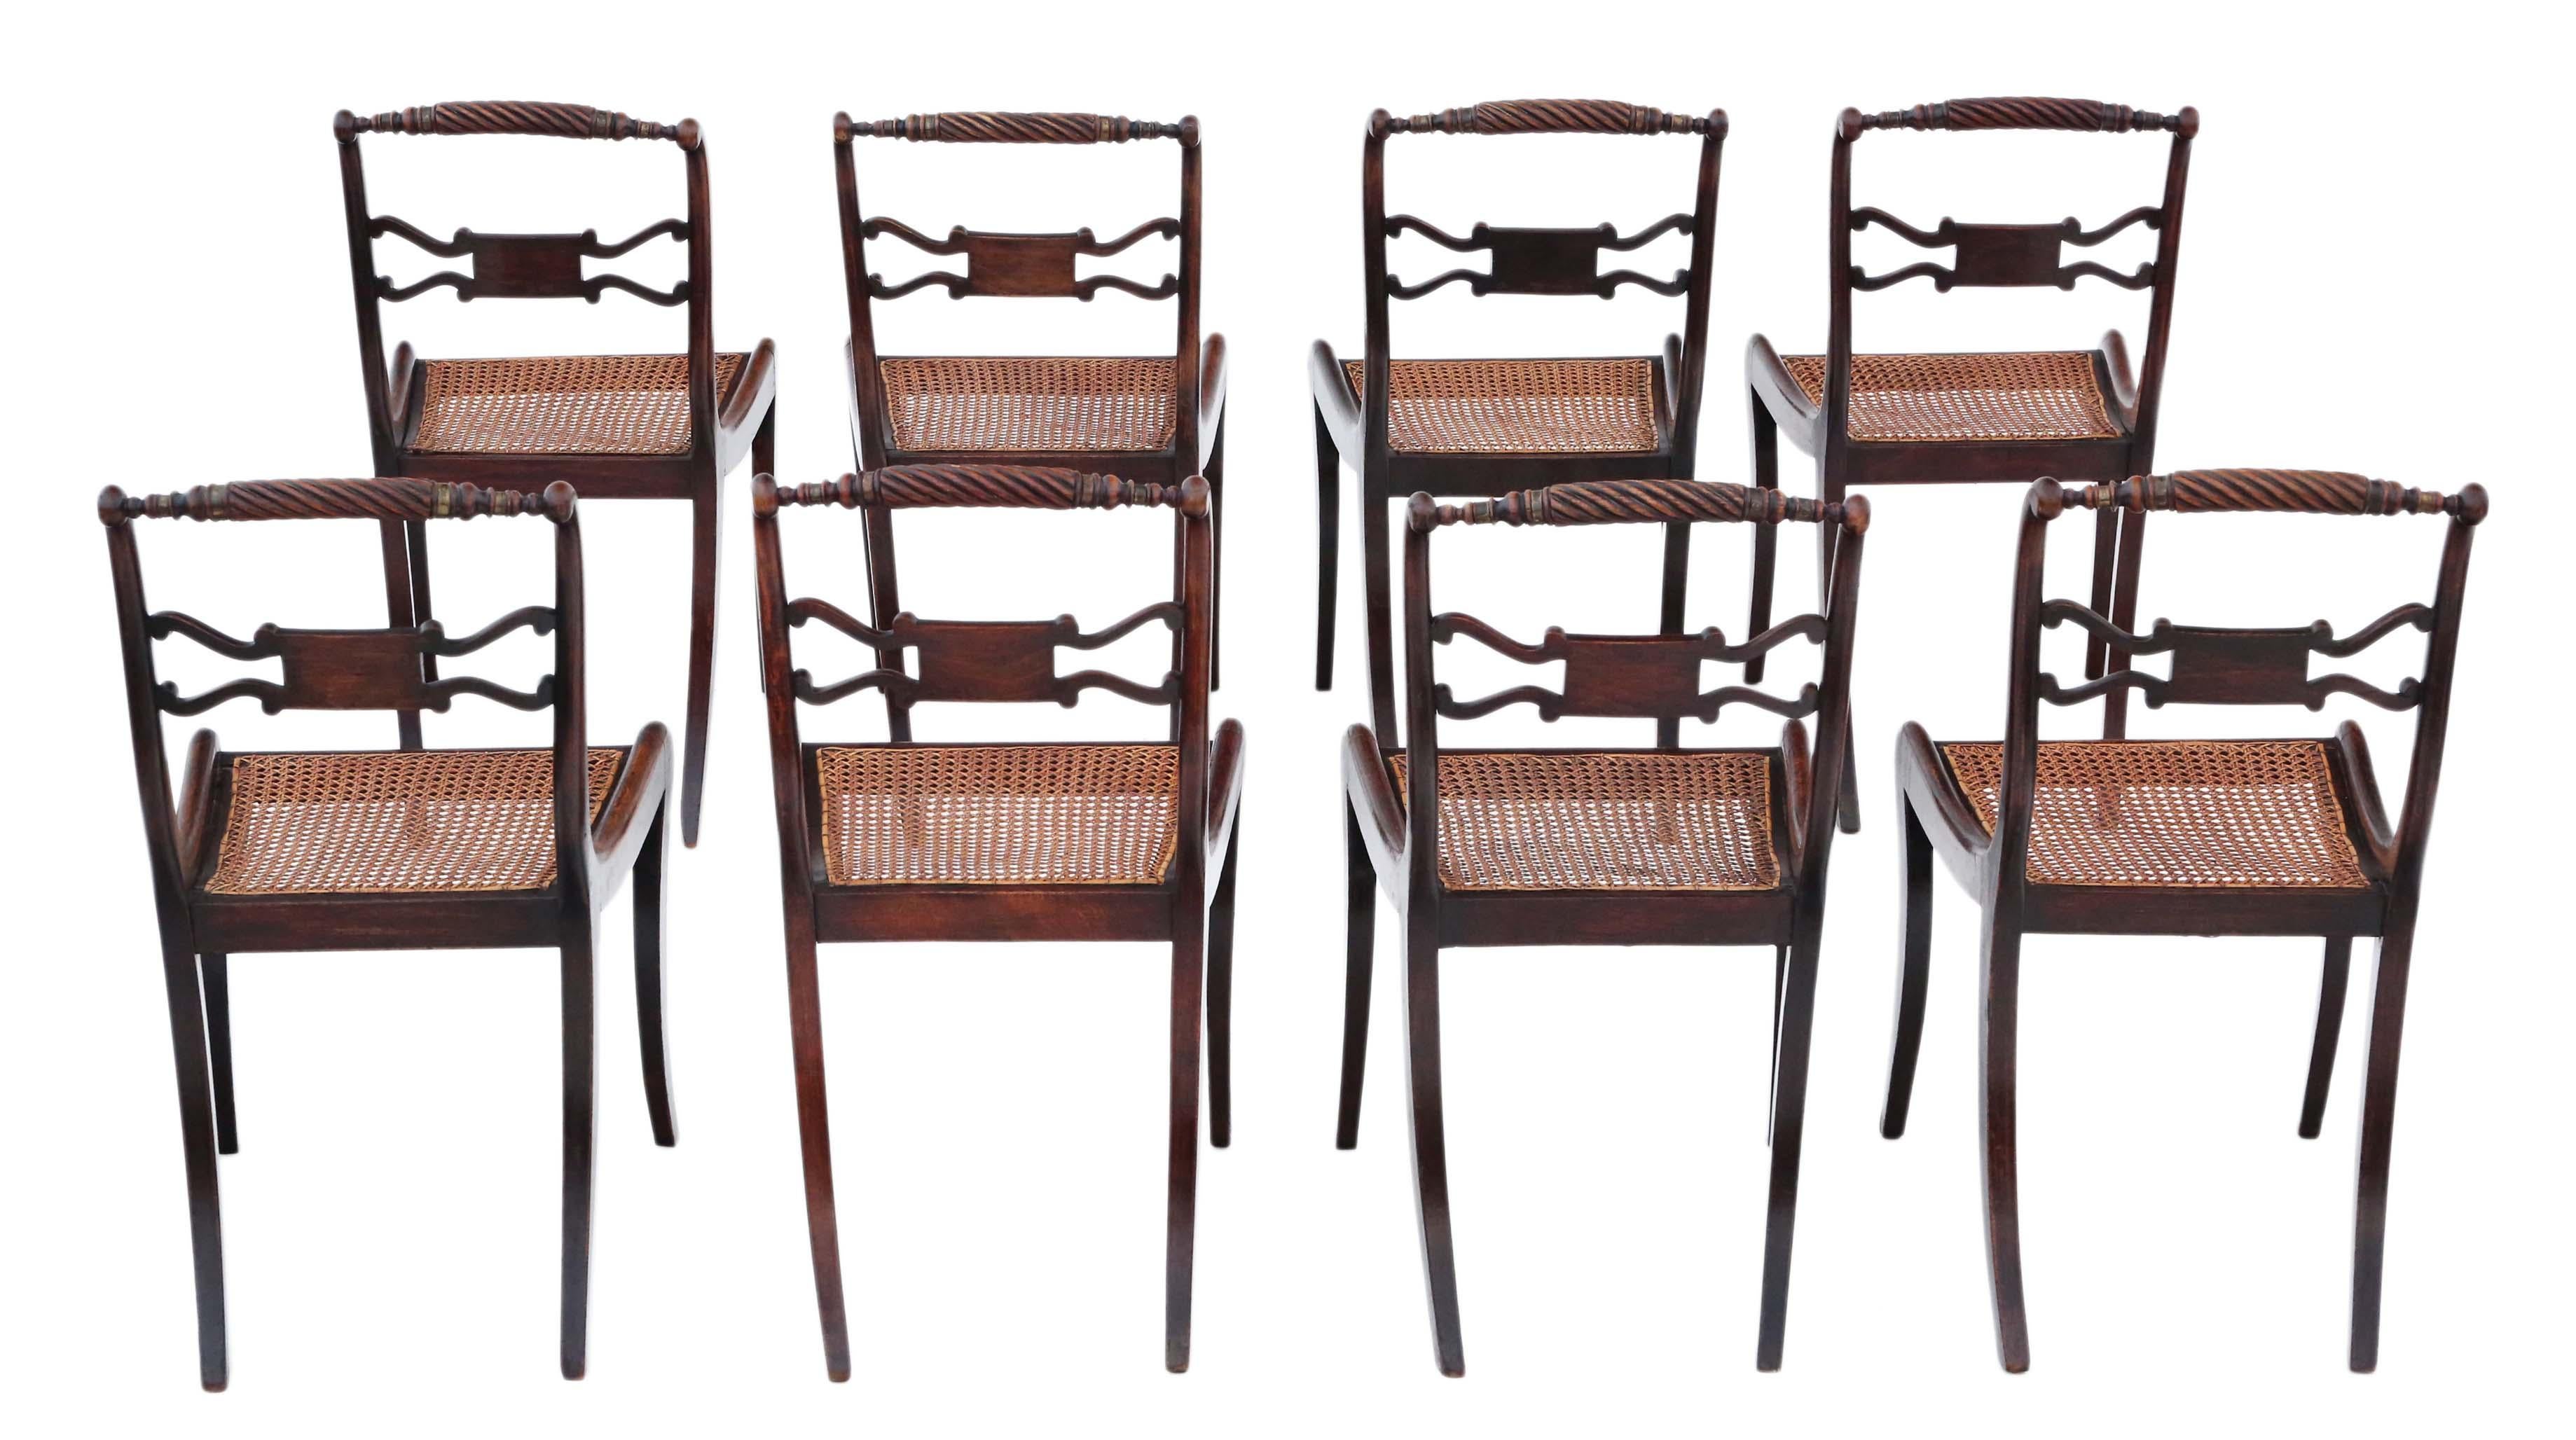 Regency Faux Rosewood Dining Chairs: Set of 8, Antique Quality, 19th Century In Good Condition For Sale In Wisbech, Cambridgeshire